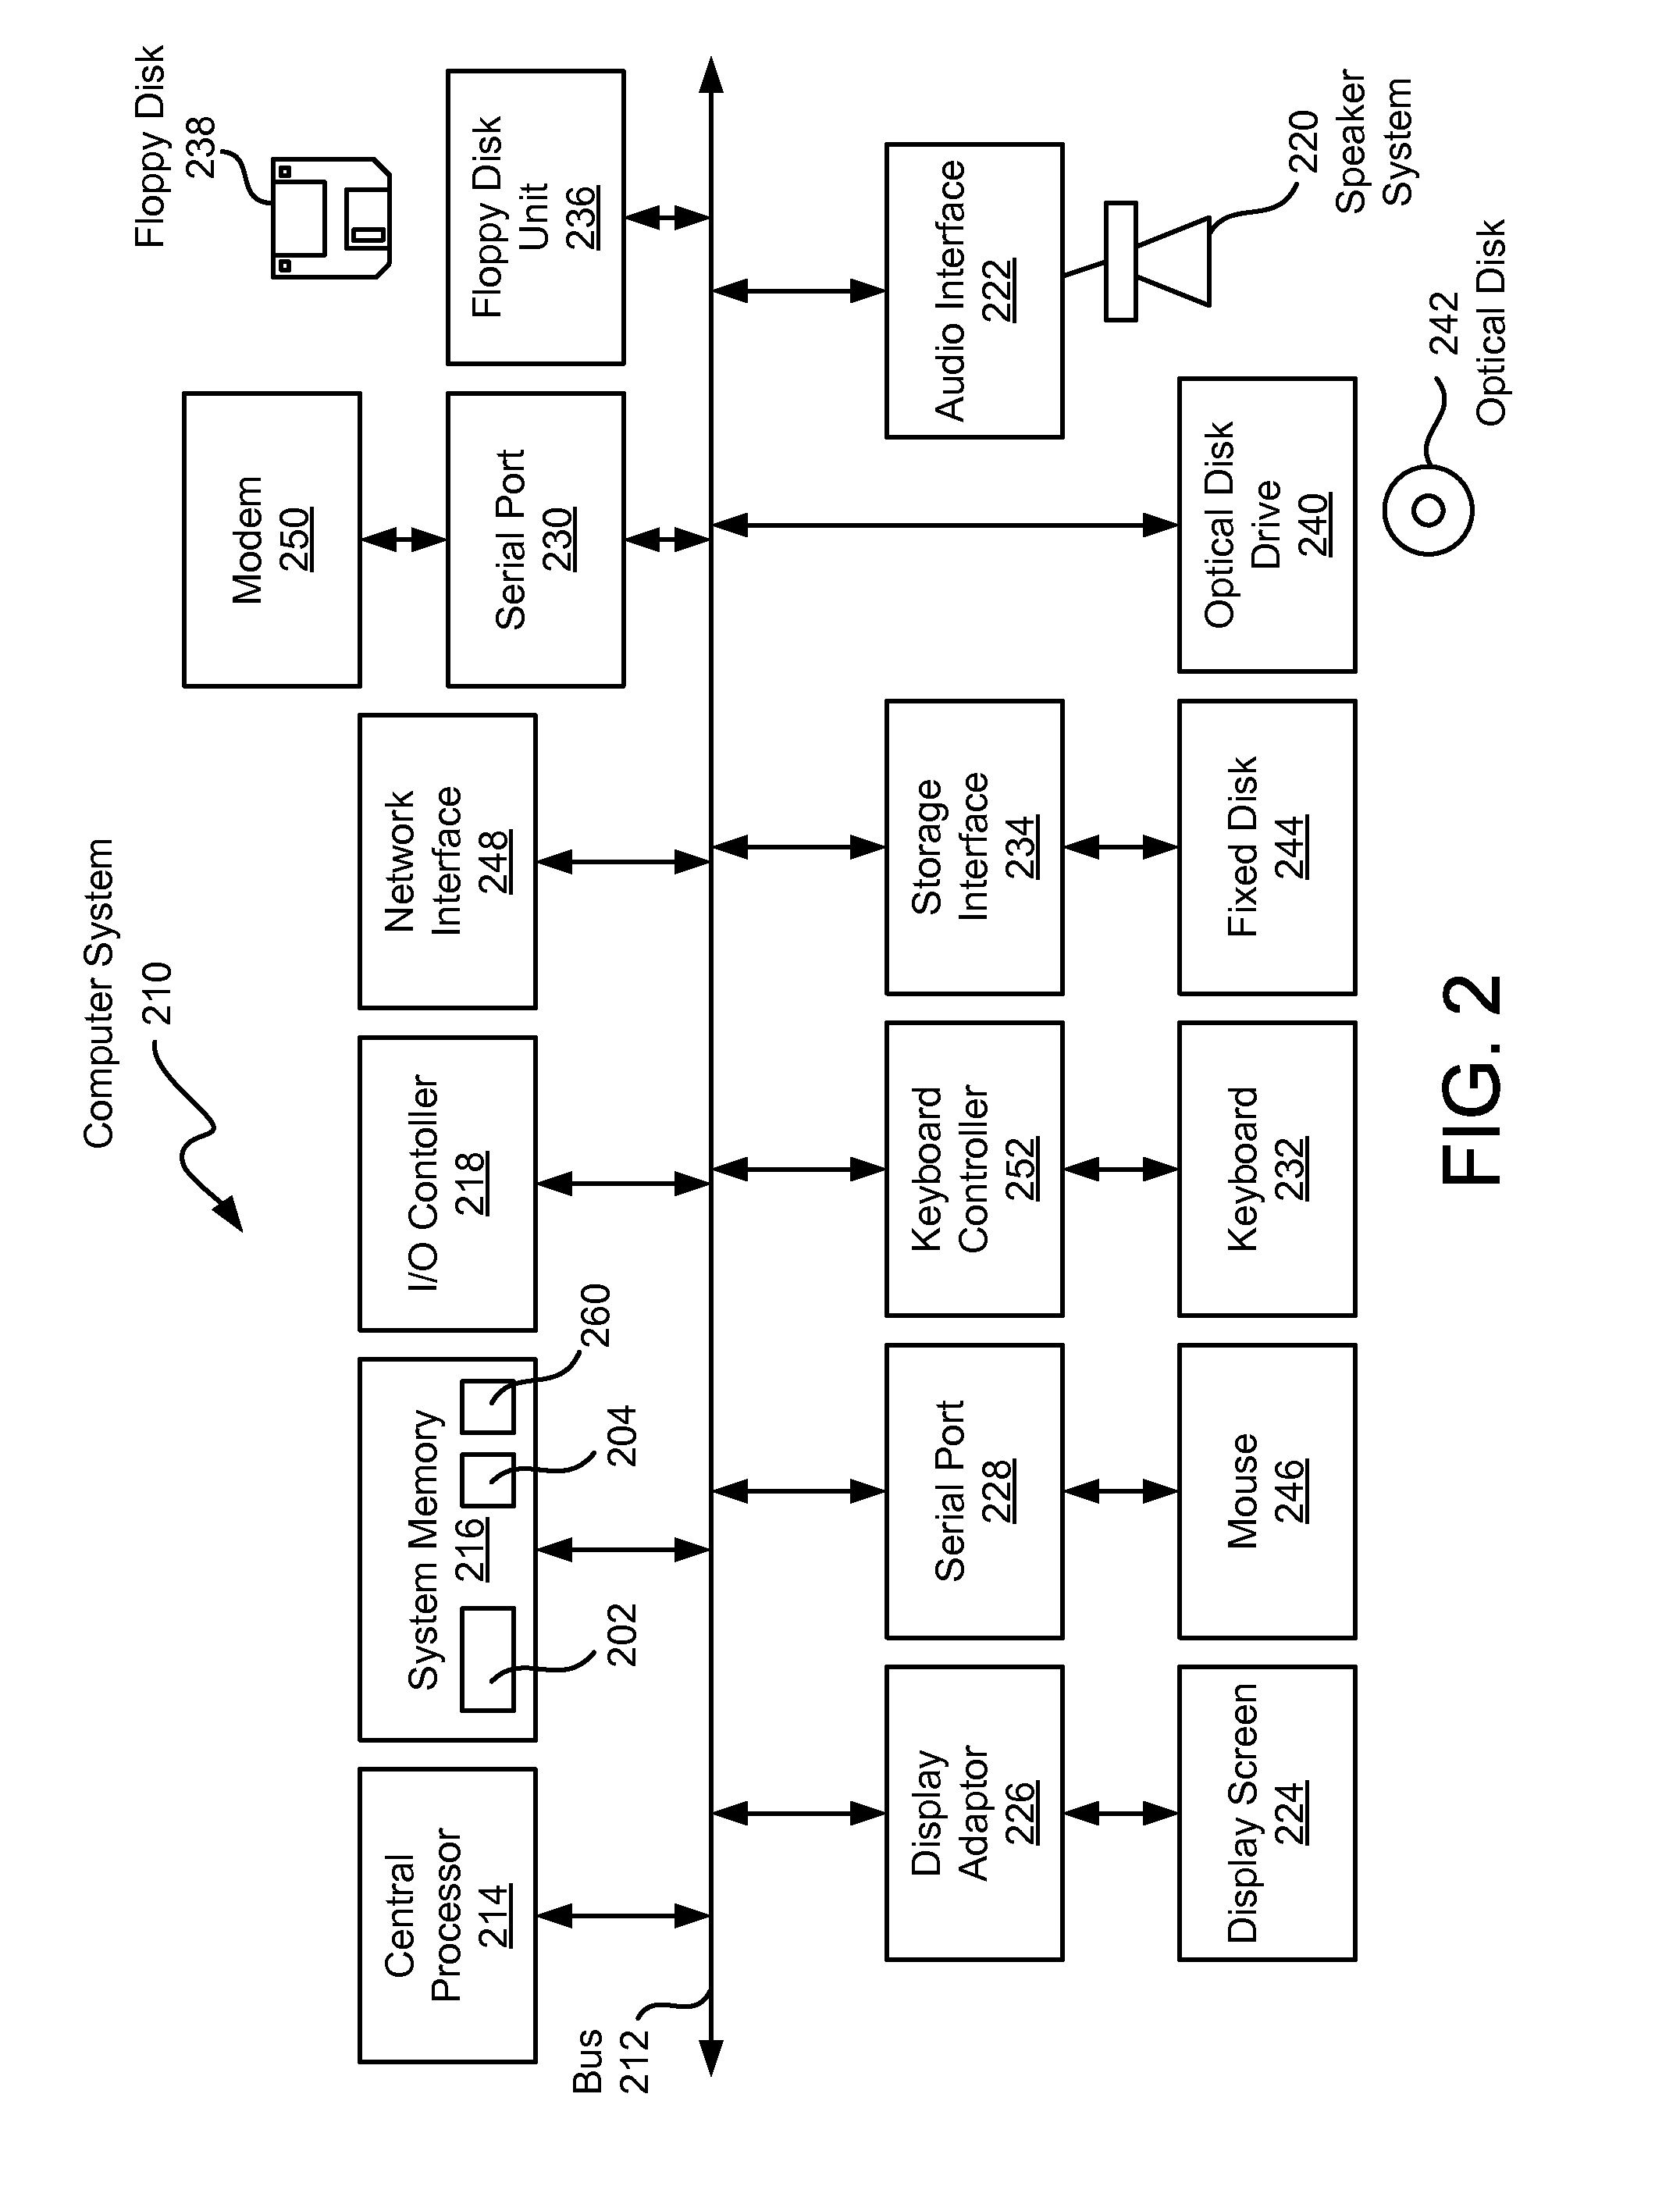 Method and system for calculating elementary symmetric functions of subsets of a set